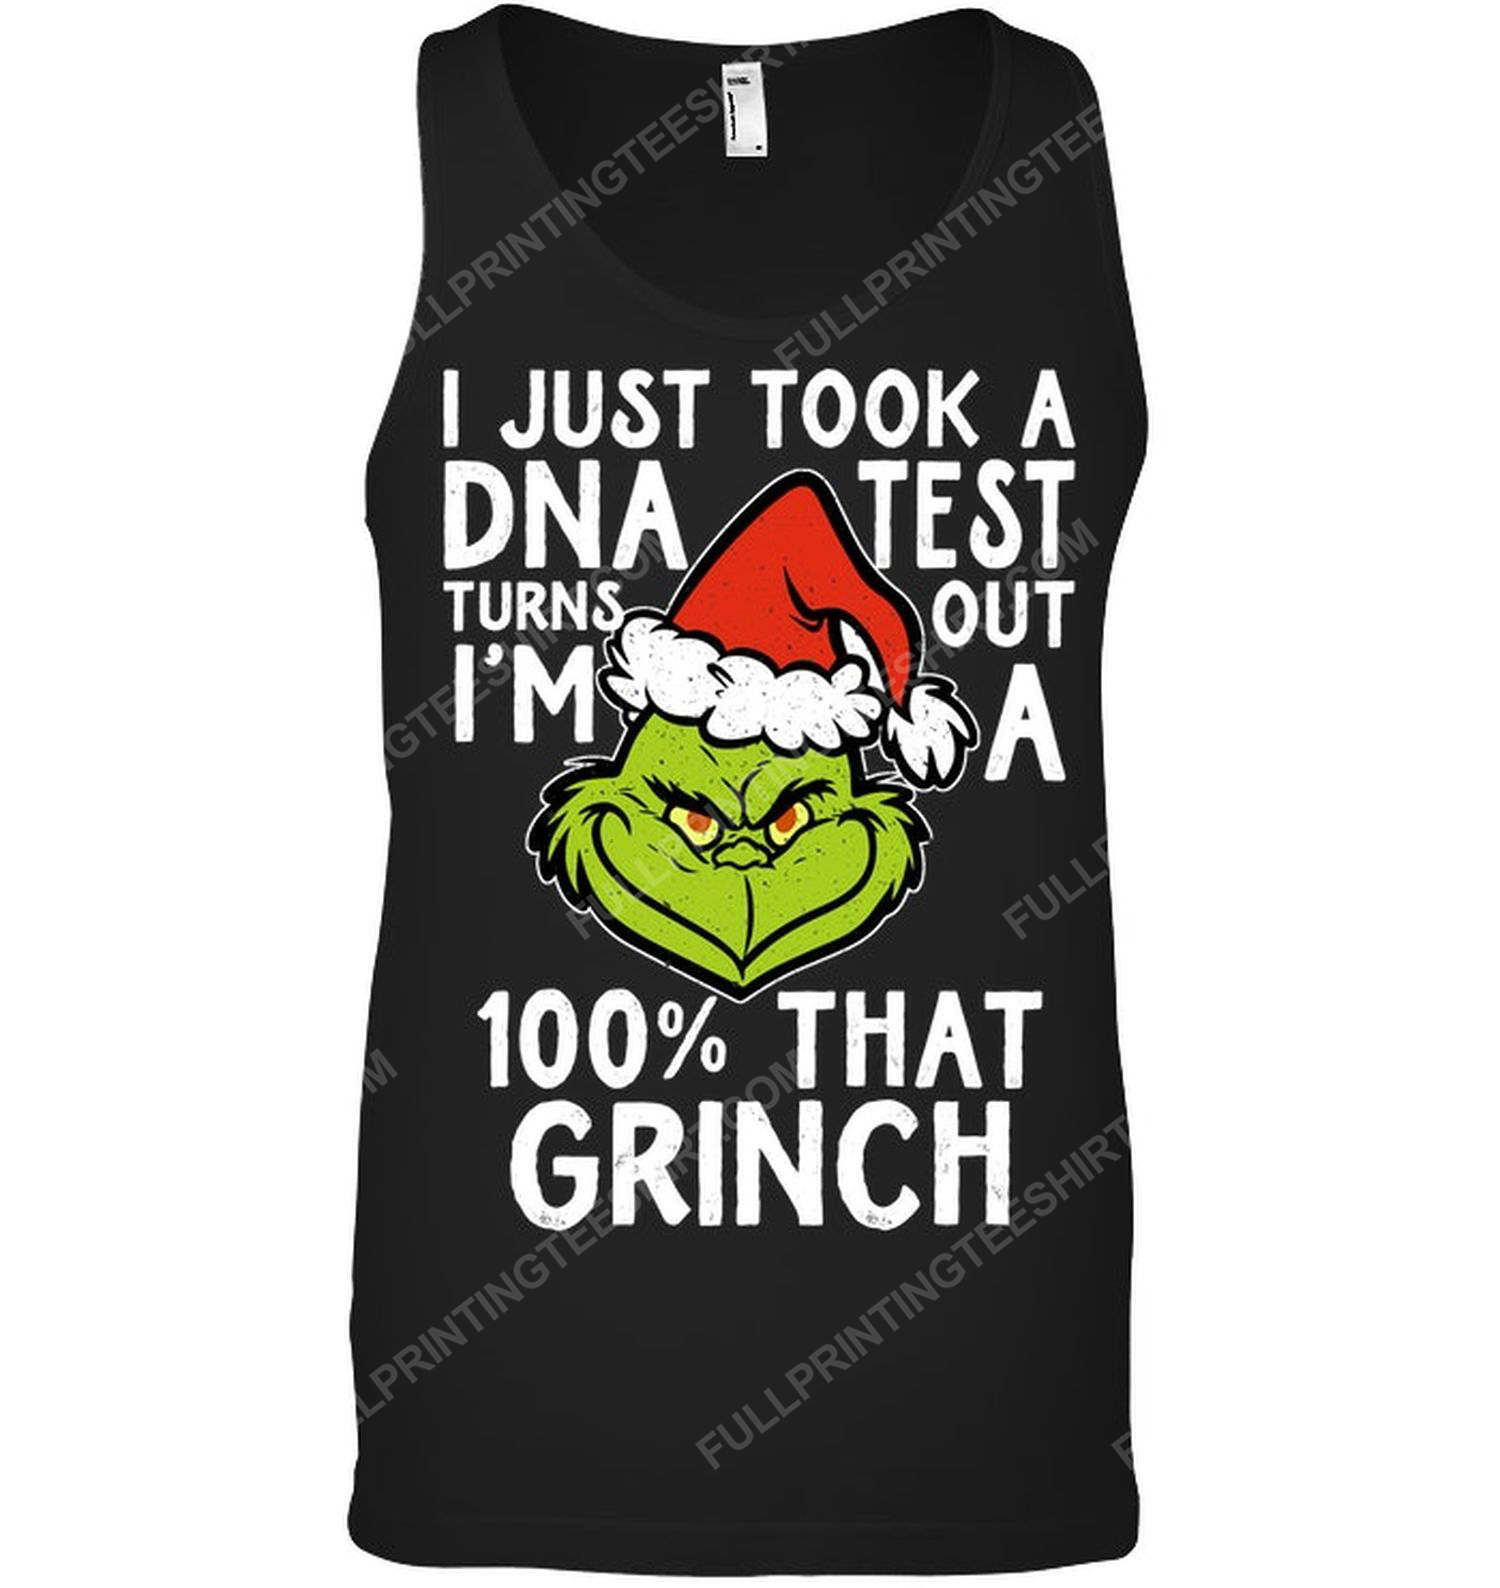 I just took a dna test turns out i'm 100 that grinch tank top